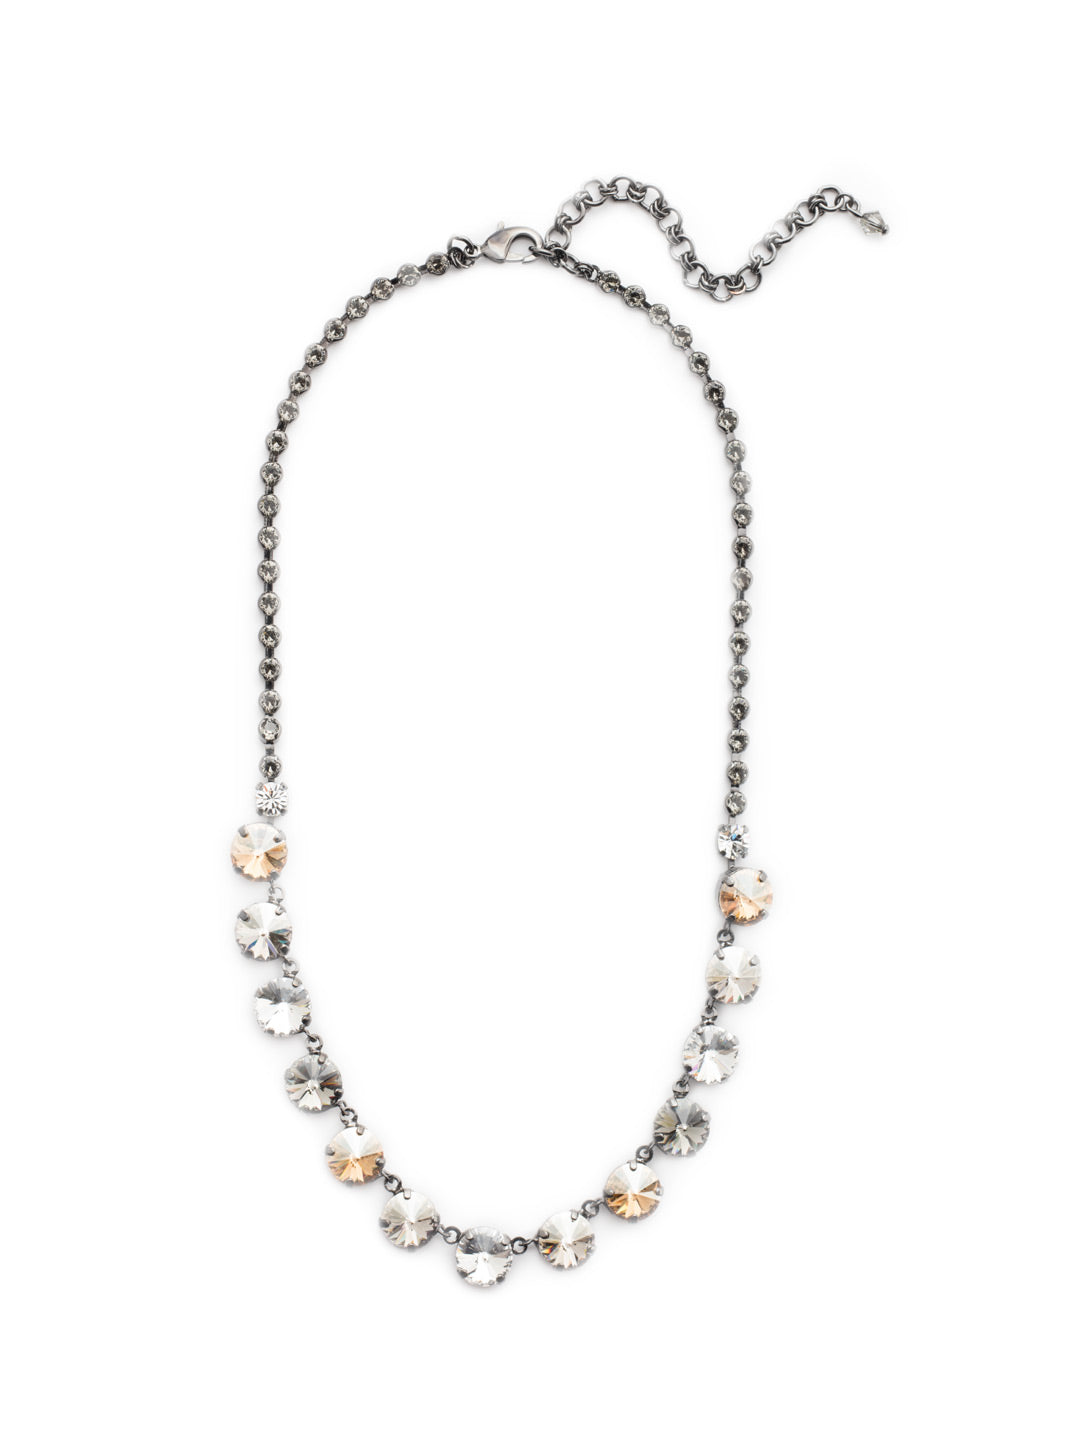 Ashley Rivoli Tennis Necklace - NCU19GMGNS - A classic beauty! This necklace boasts a little extra flare with its beautifully faceted rivoli crystals and decorative stone encrusted chain. You're set to sparkle from every angle. From Sorrelli's Golden Shadow collection in our Gun Metal finish.